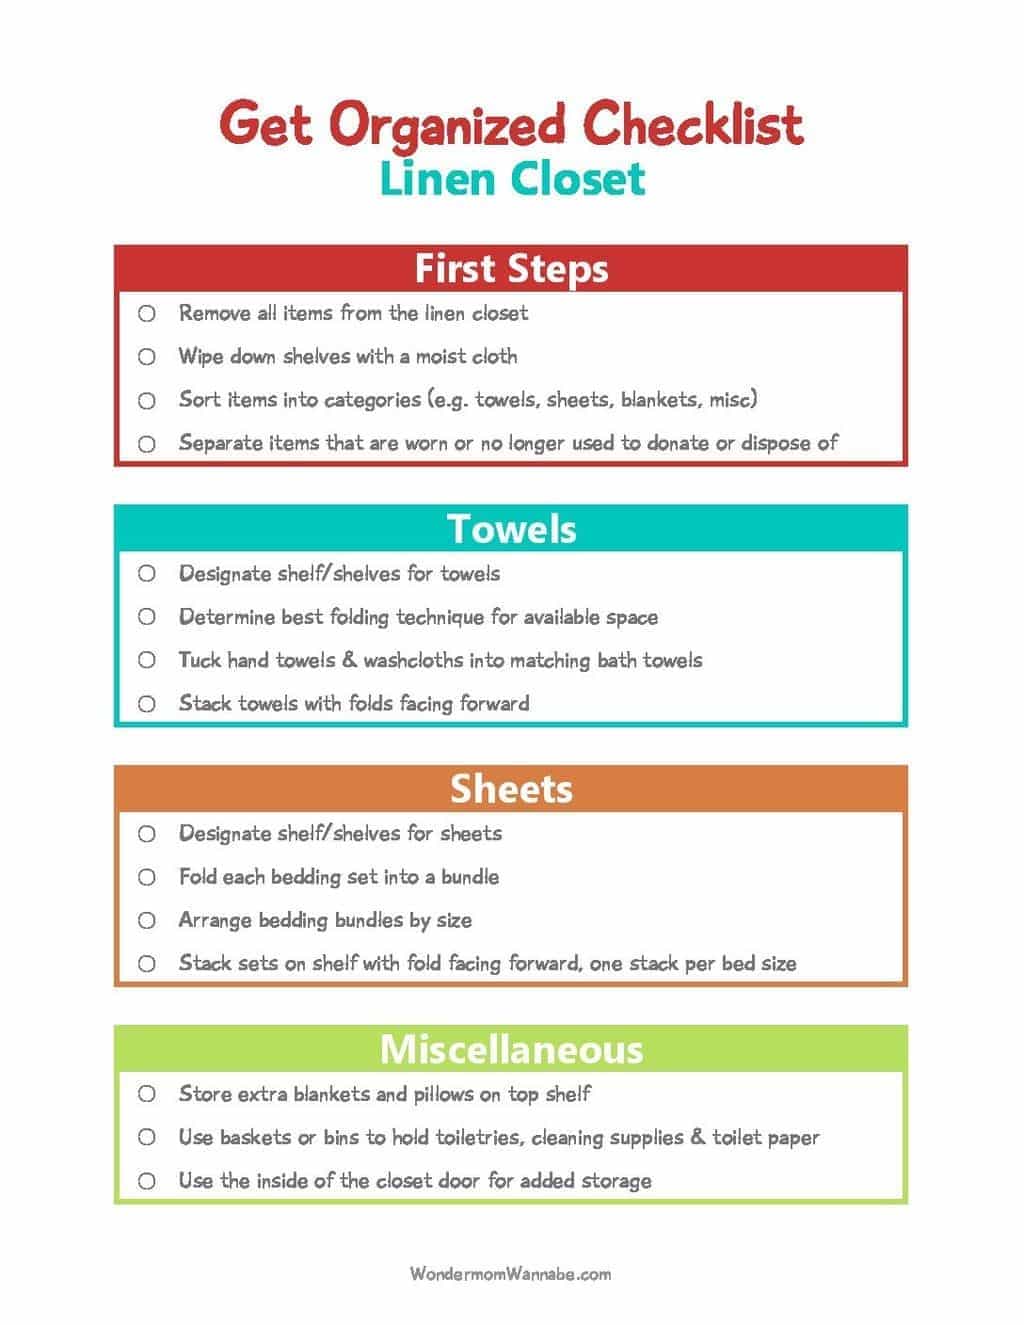 This Get Organized Checklist for Your Linen Closet will walk you through a simple process to whip your linen closet into shape. #linencloset #organize #checklist #printable via @wondermomwannab